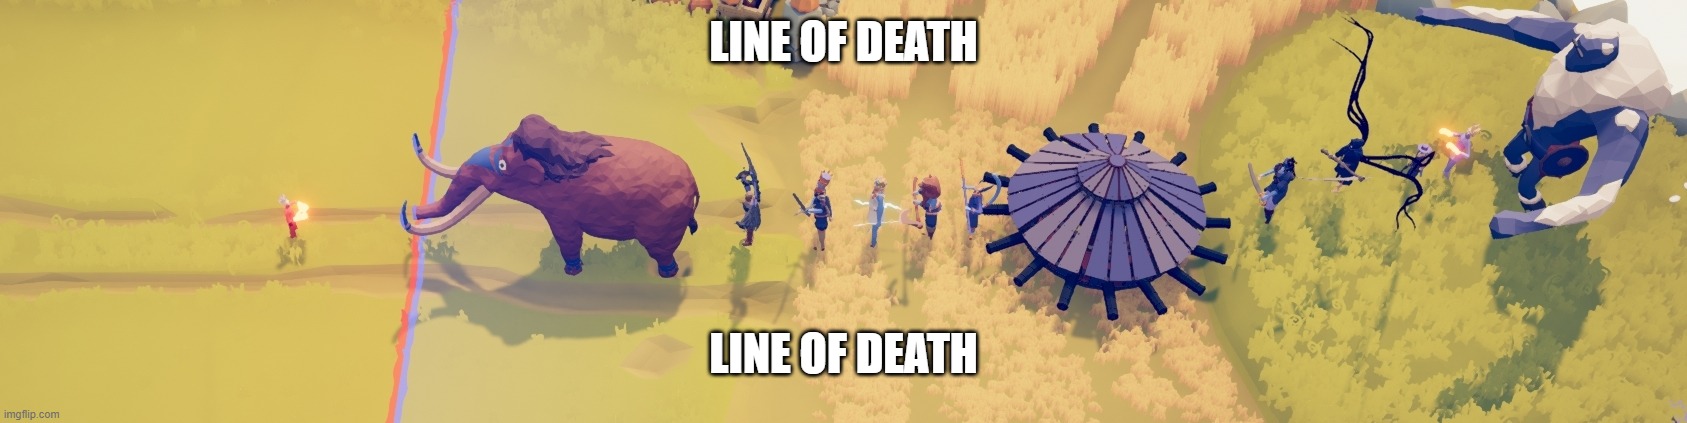 line of death because mui goku can instant kill lol | LINE OF DEATH; LINE OF DEATH | image tagged in goku,tabs,line of death | made w/ Imgflip meme maker